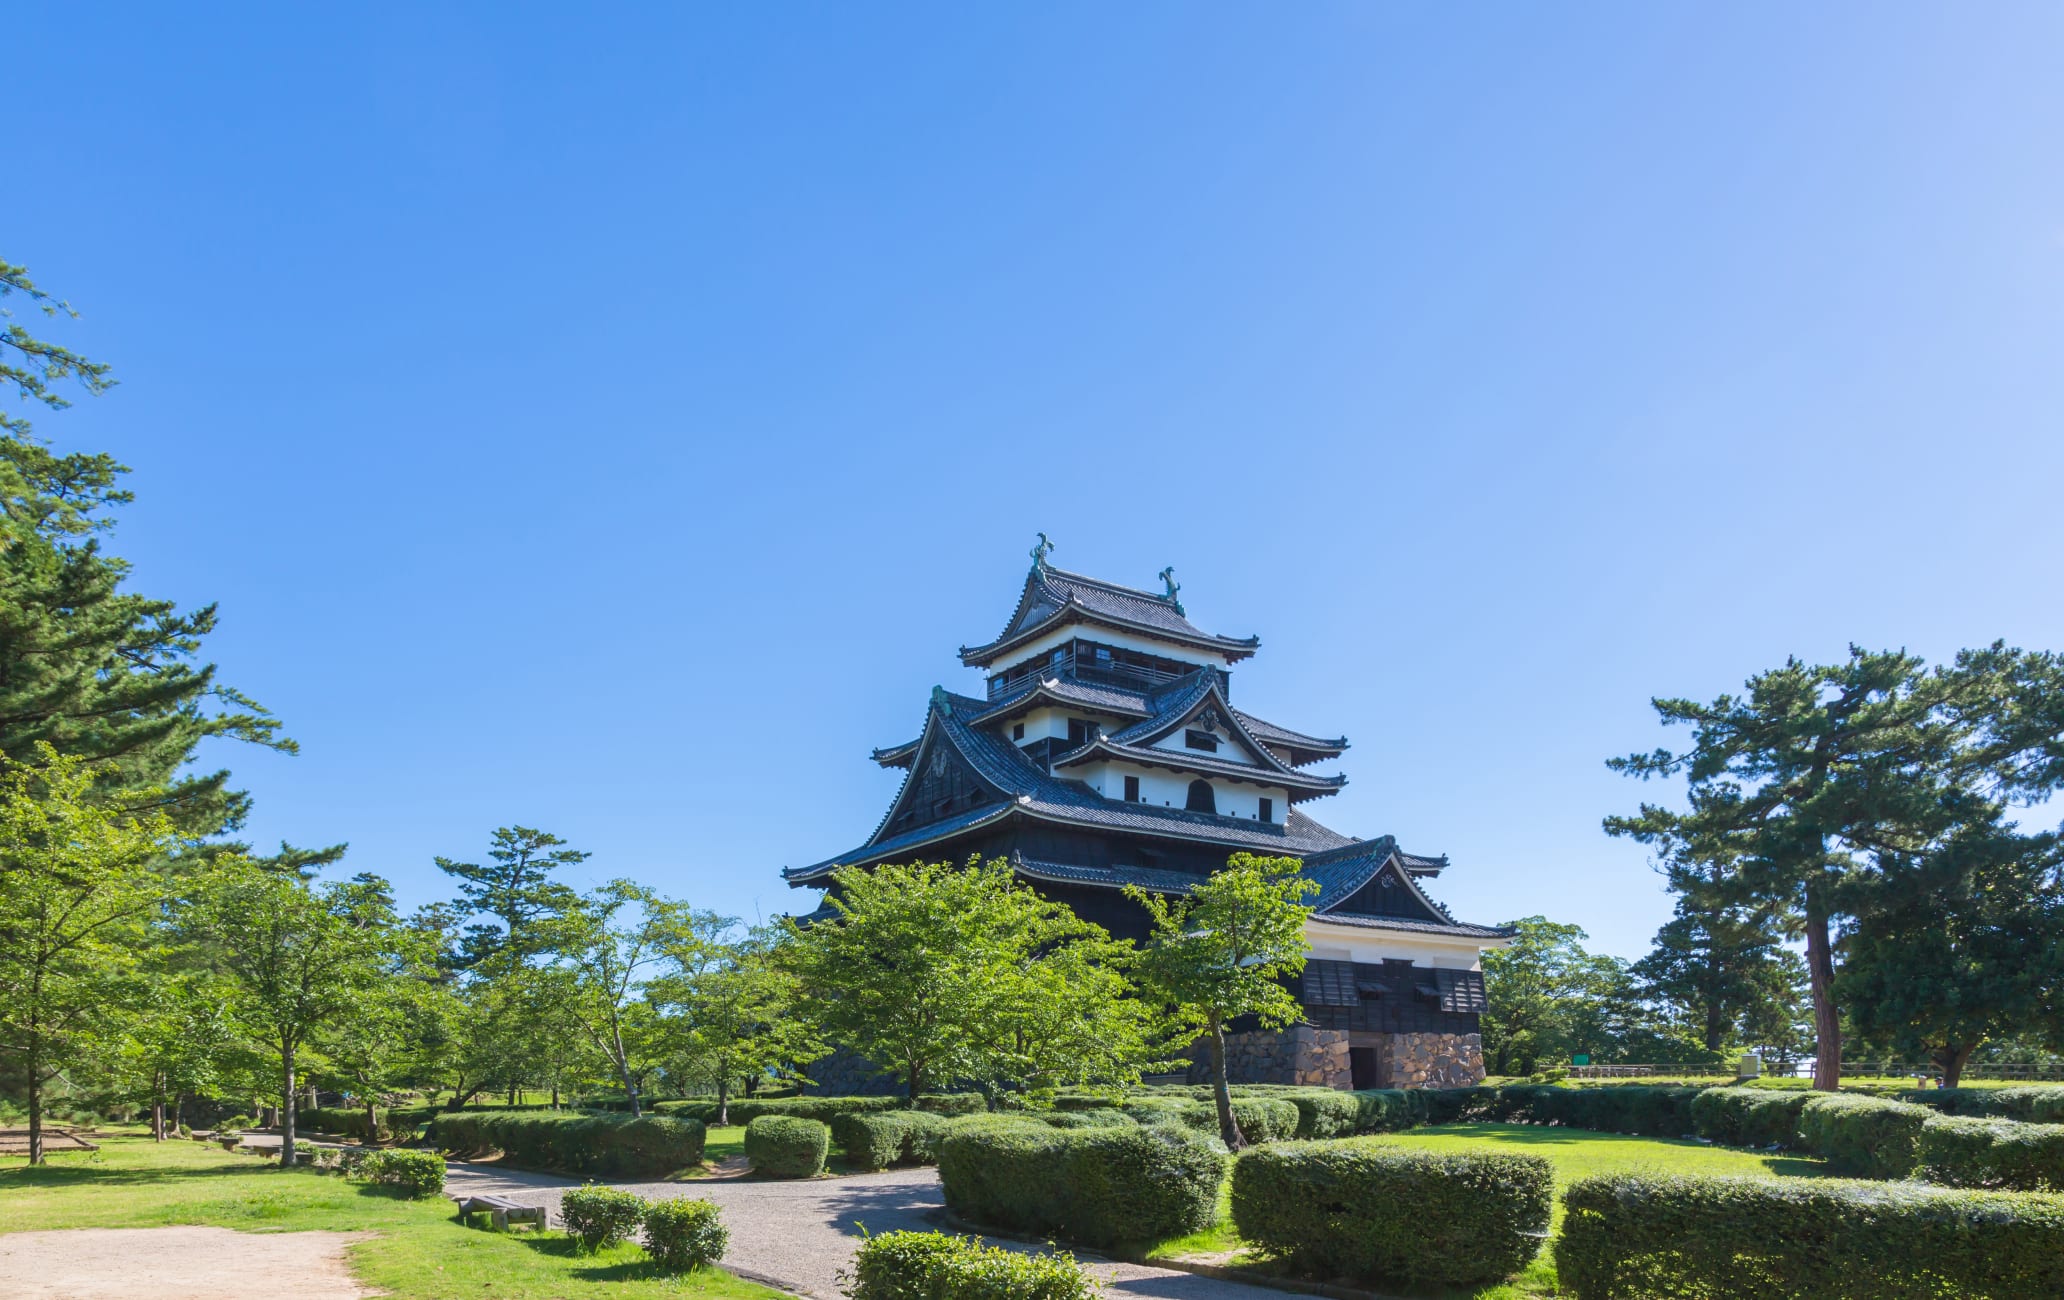 Things to Do in Kagoshima: Top Attractions and Activities